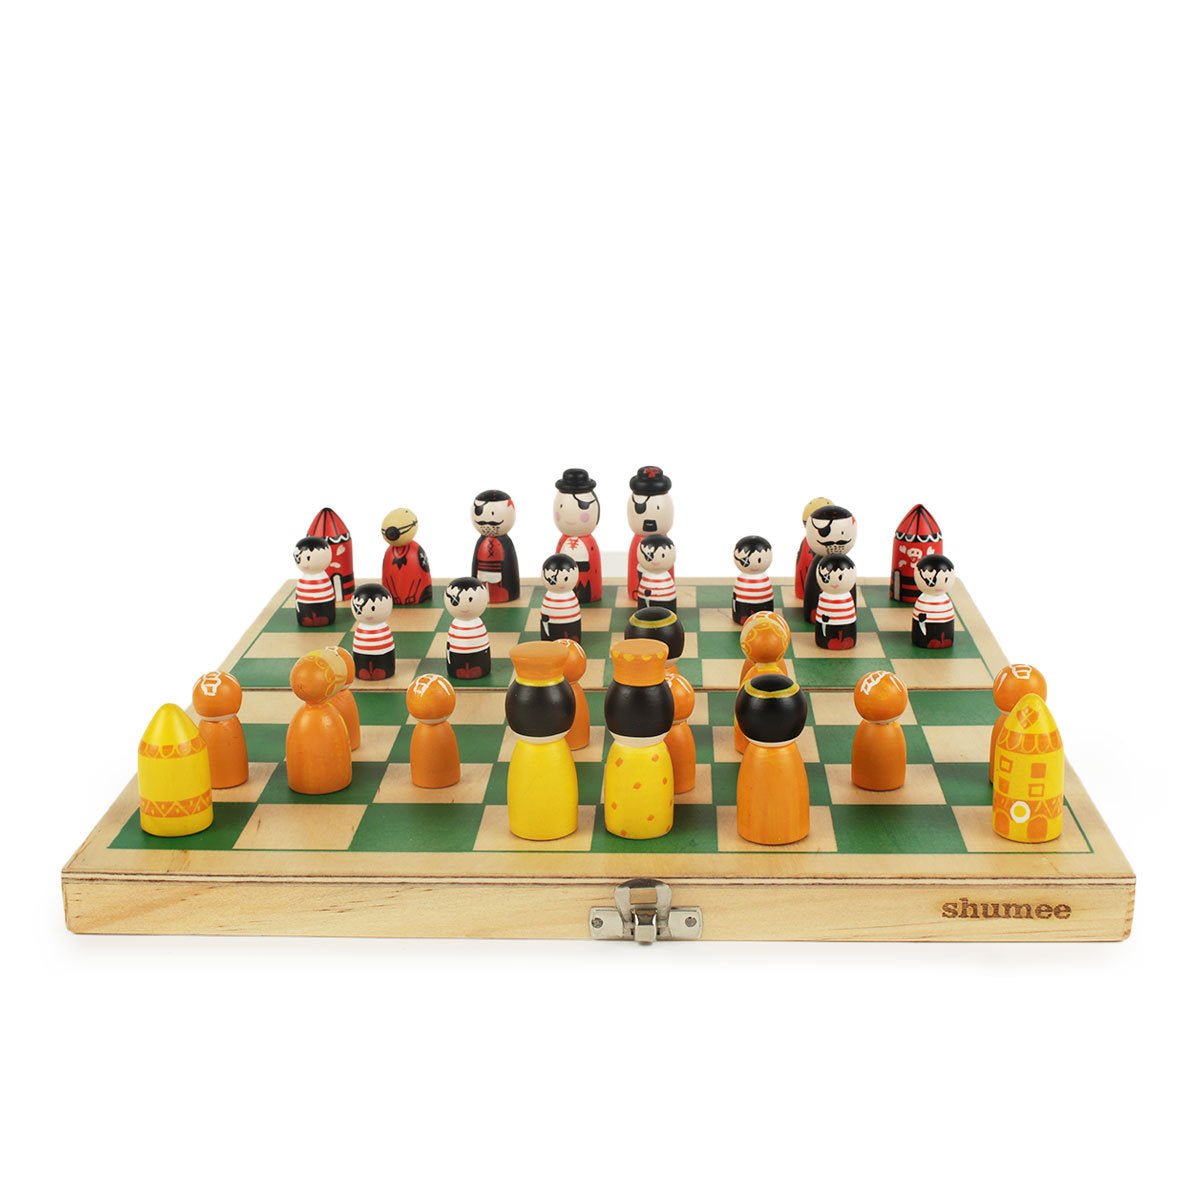 Shumee Pirates Vs Royals- Wooden Chess Set - PP-IN-CH-W-4yr-0084